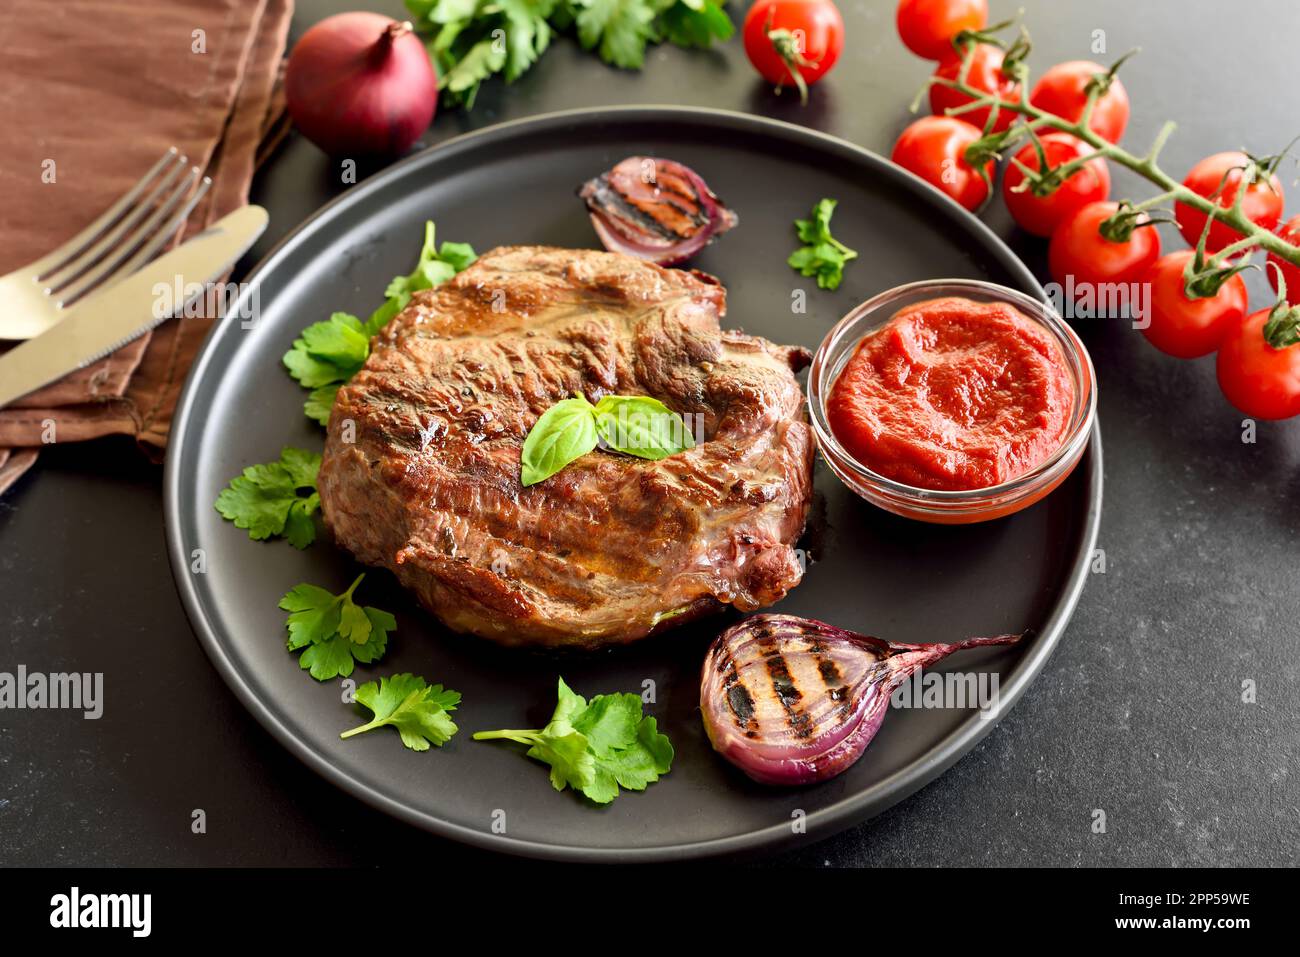 Fried beef steak on plate Stock Photo